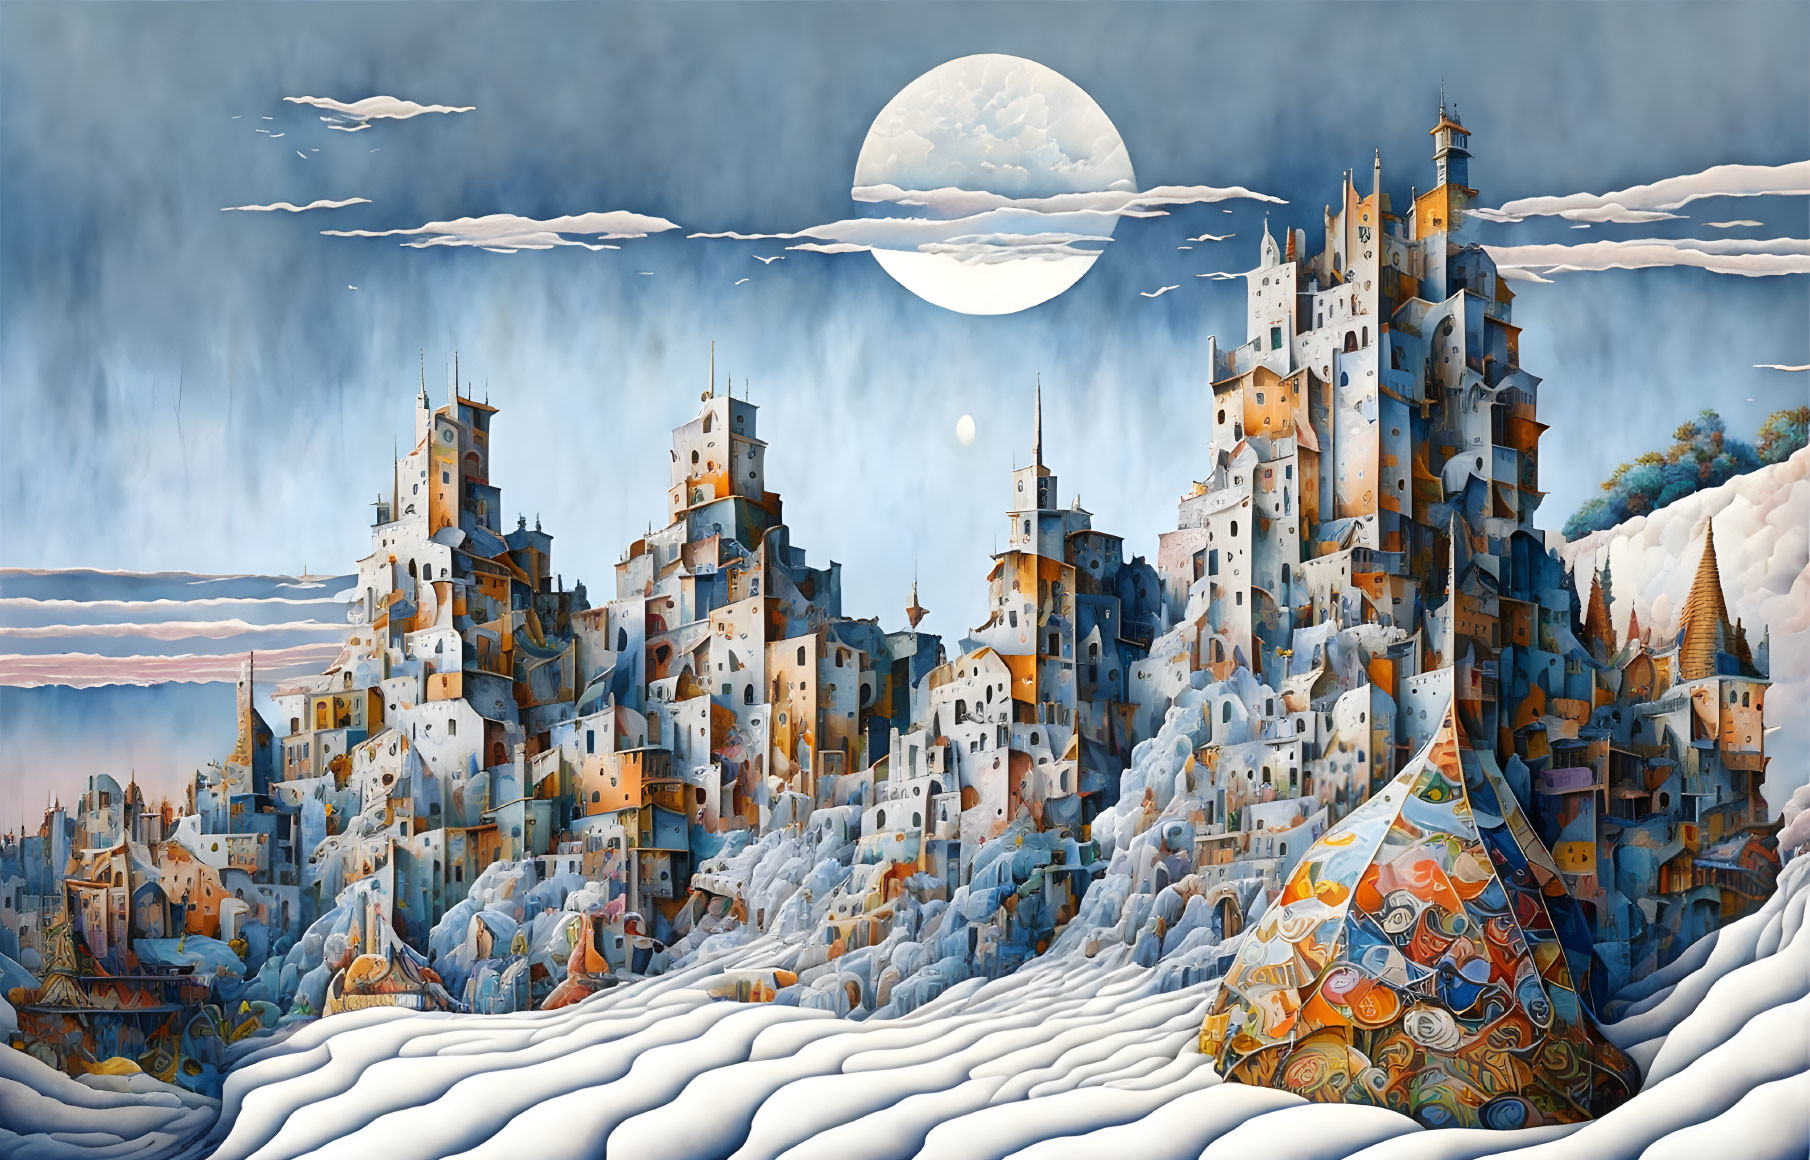 Surreal snowy landscape with multi-tiered castles under full moon